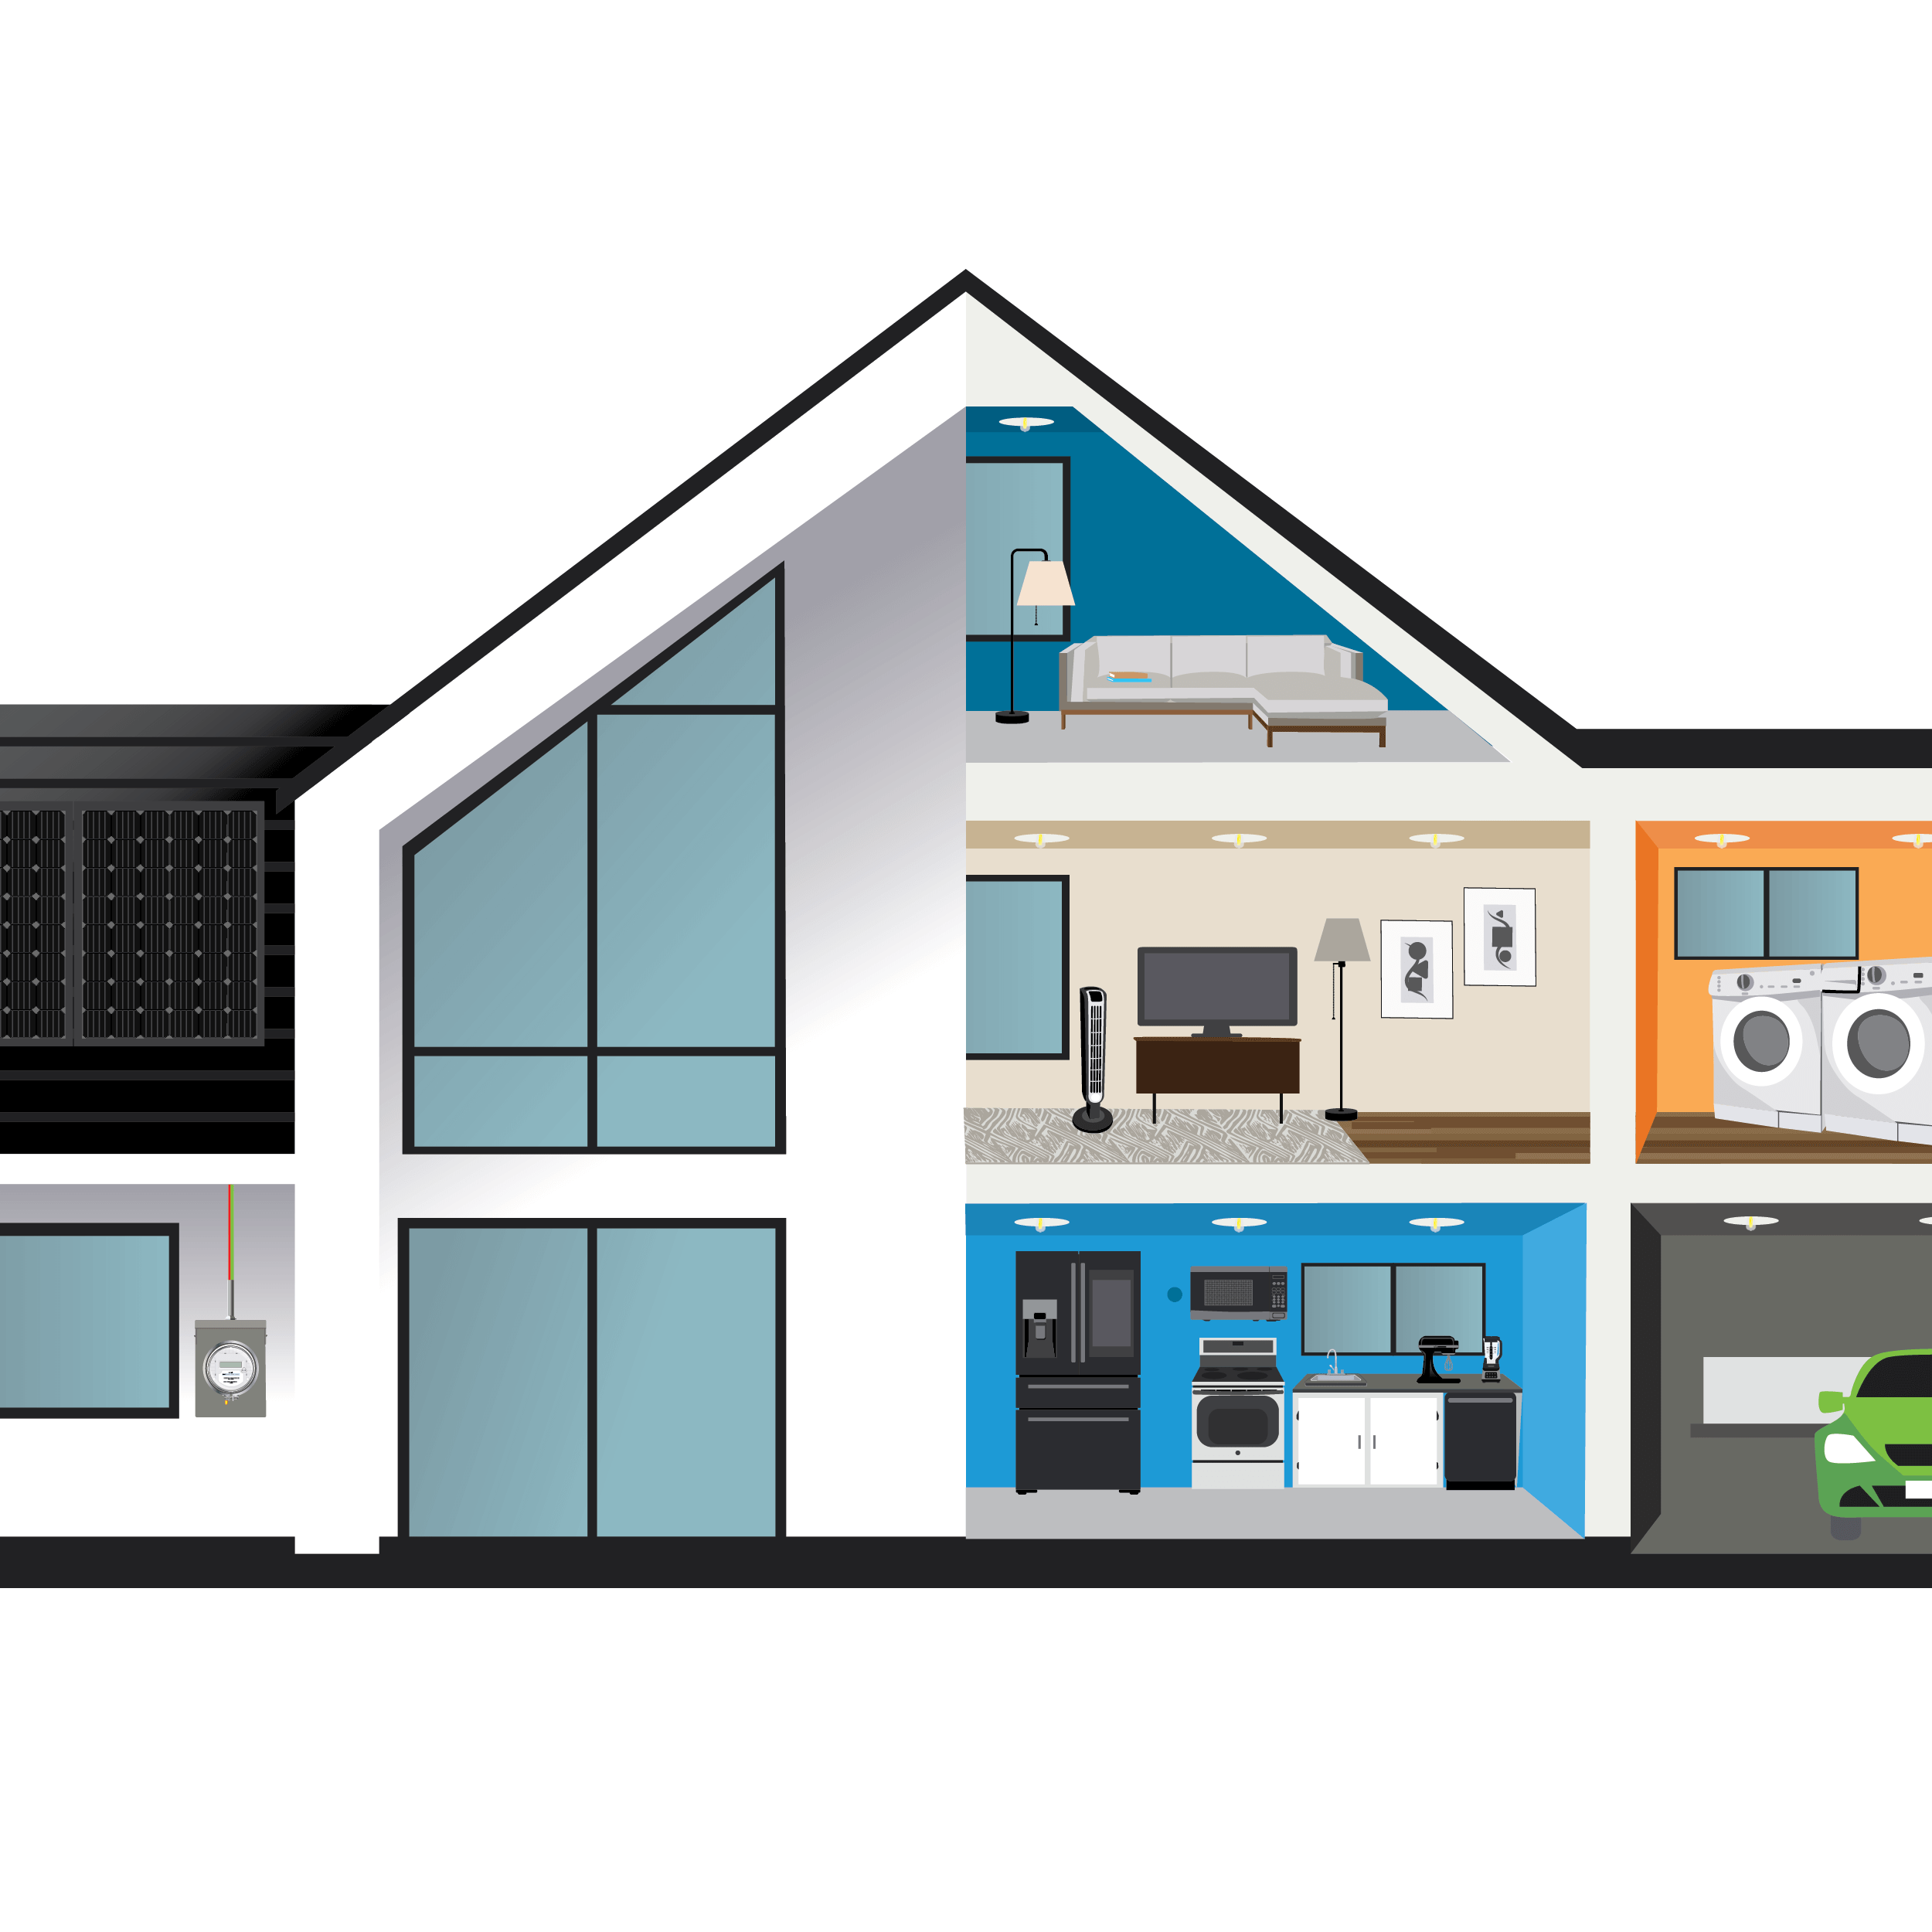 Illustration of the inside of a house with common household appliances per room